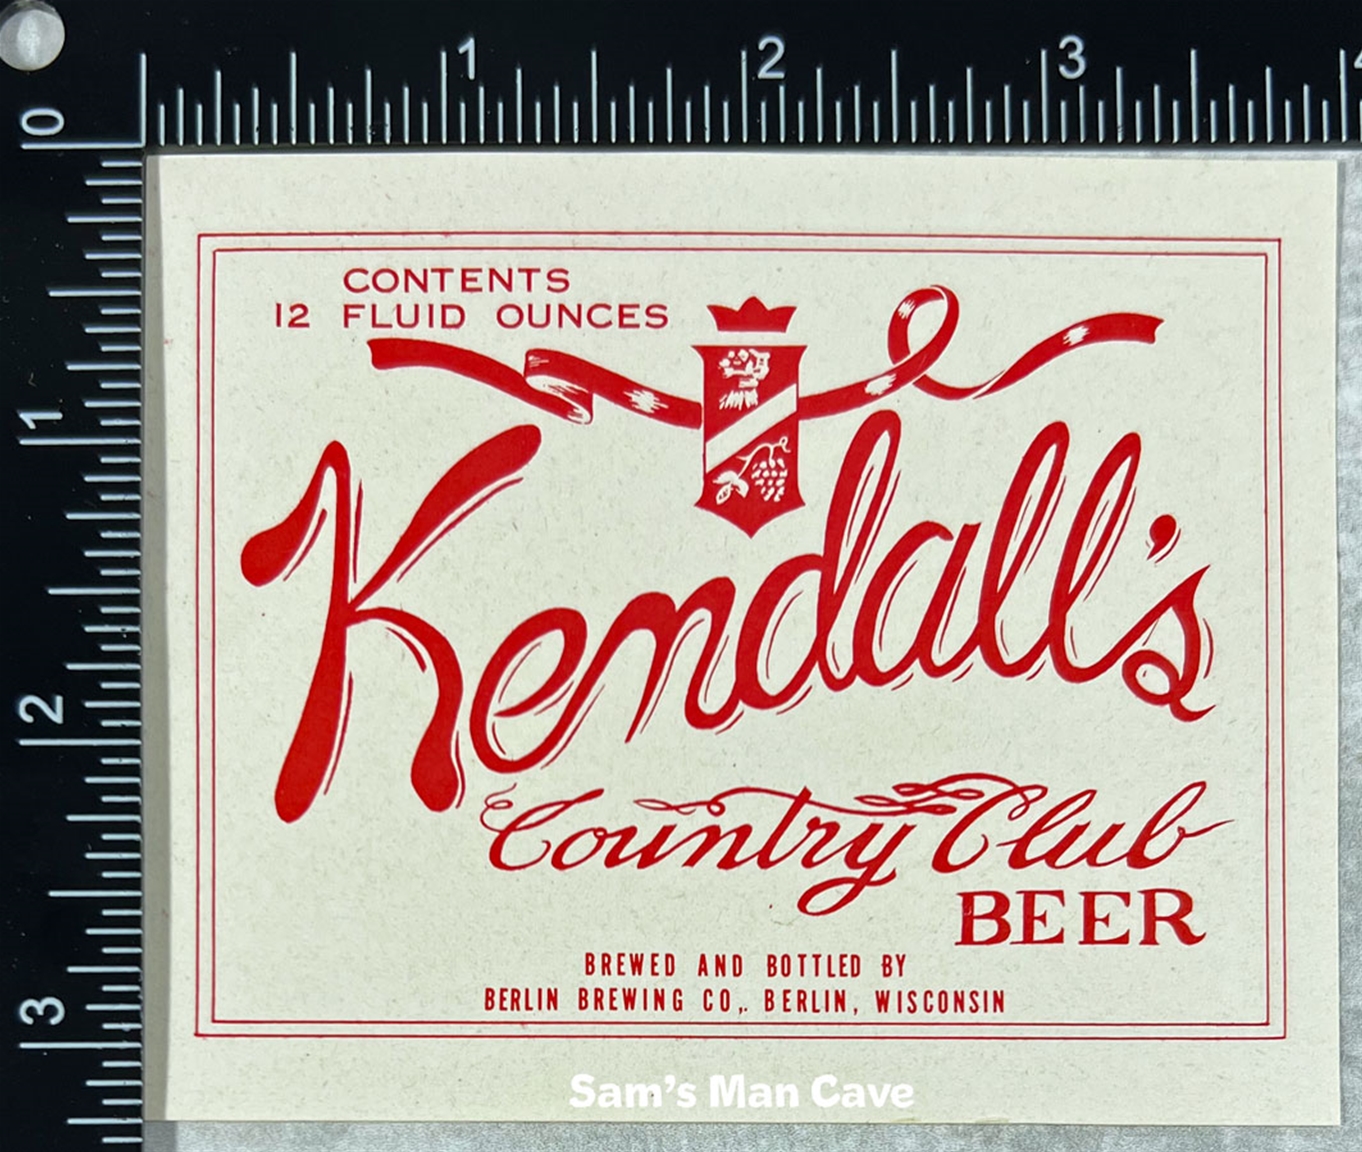 Kendall's Country Club Beer Label